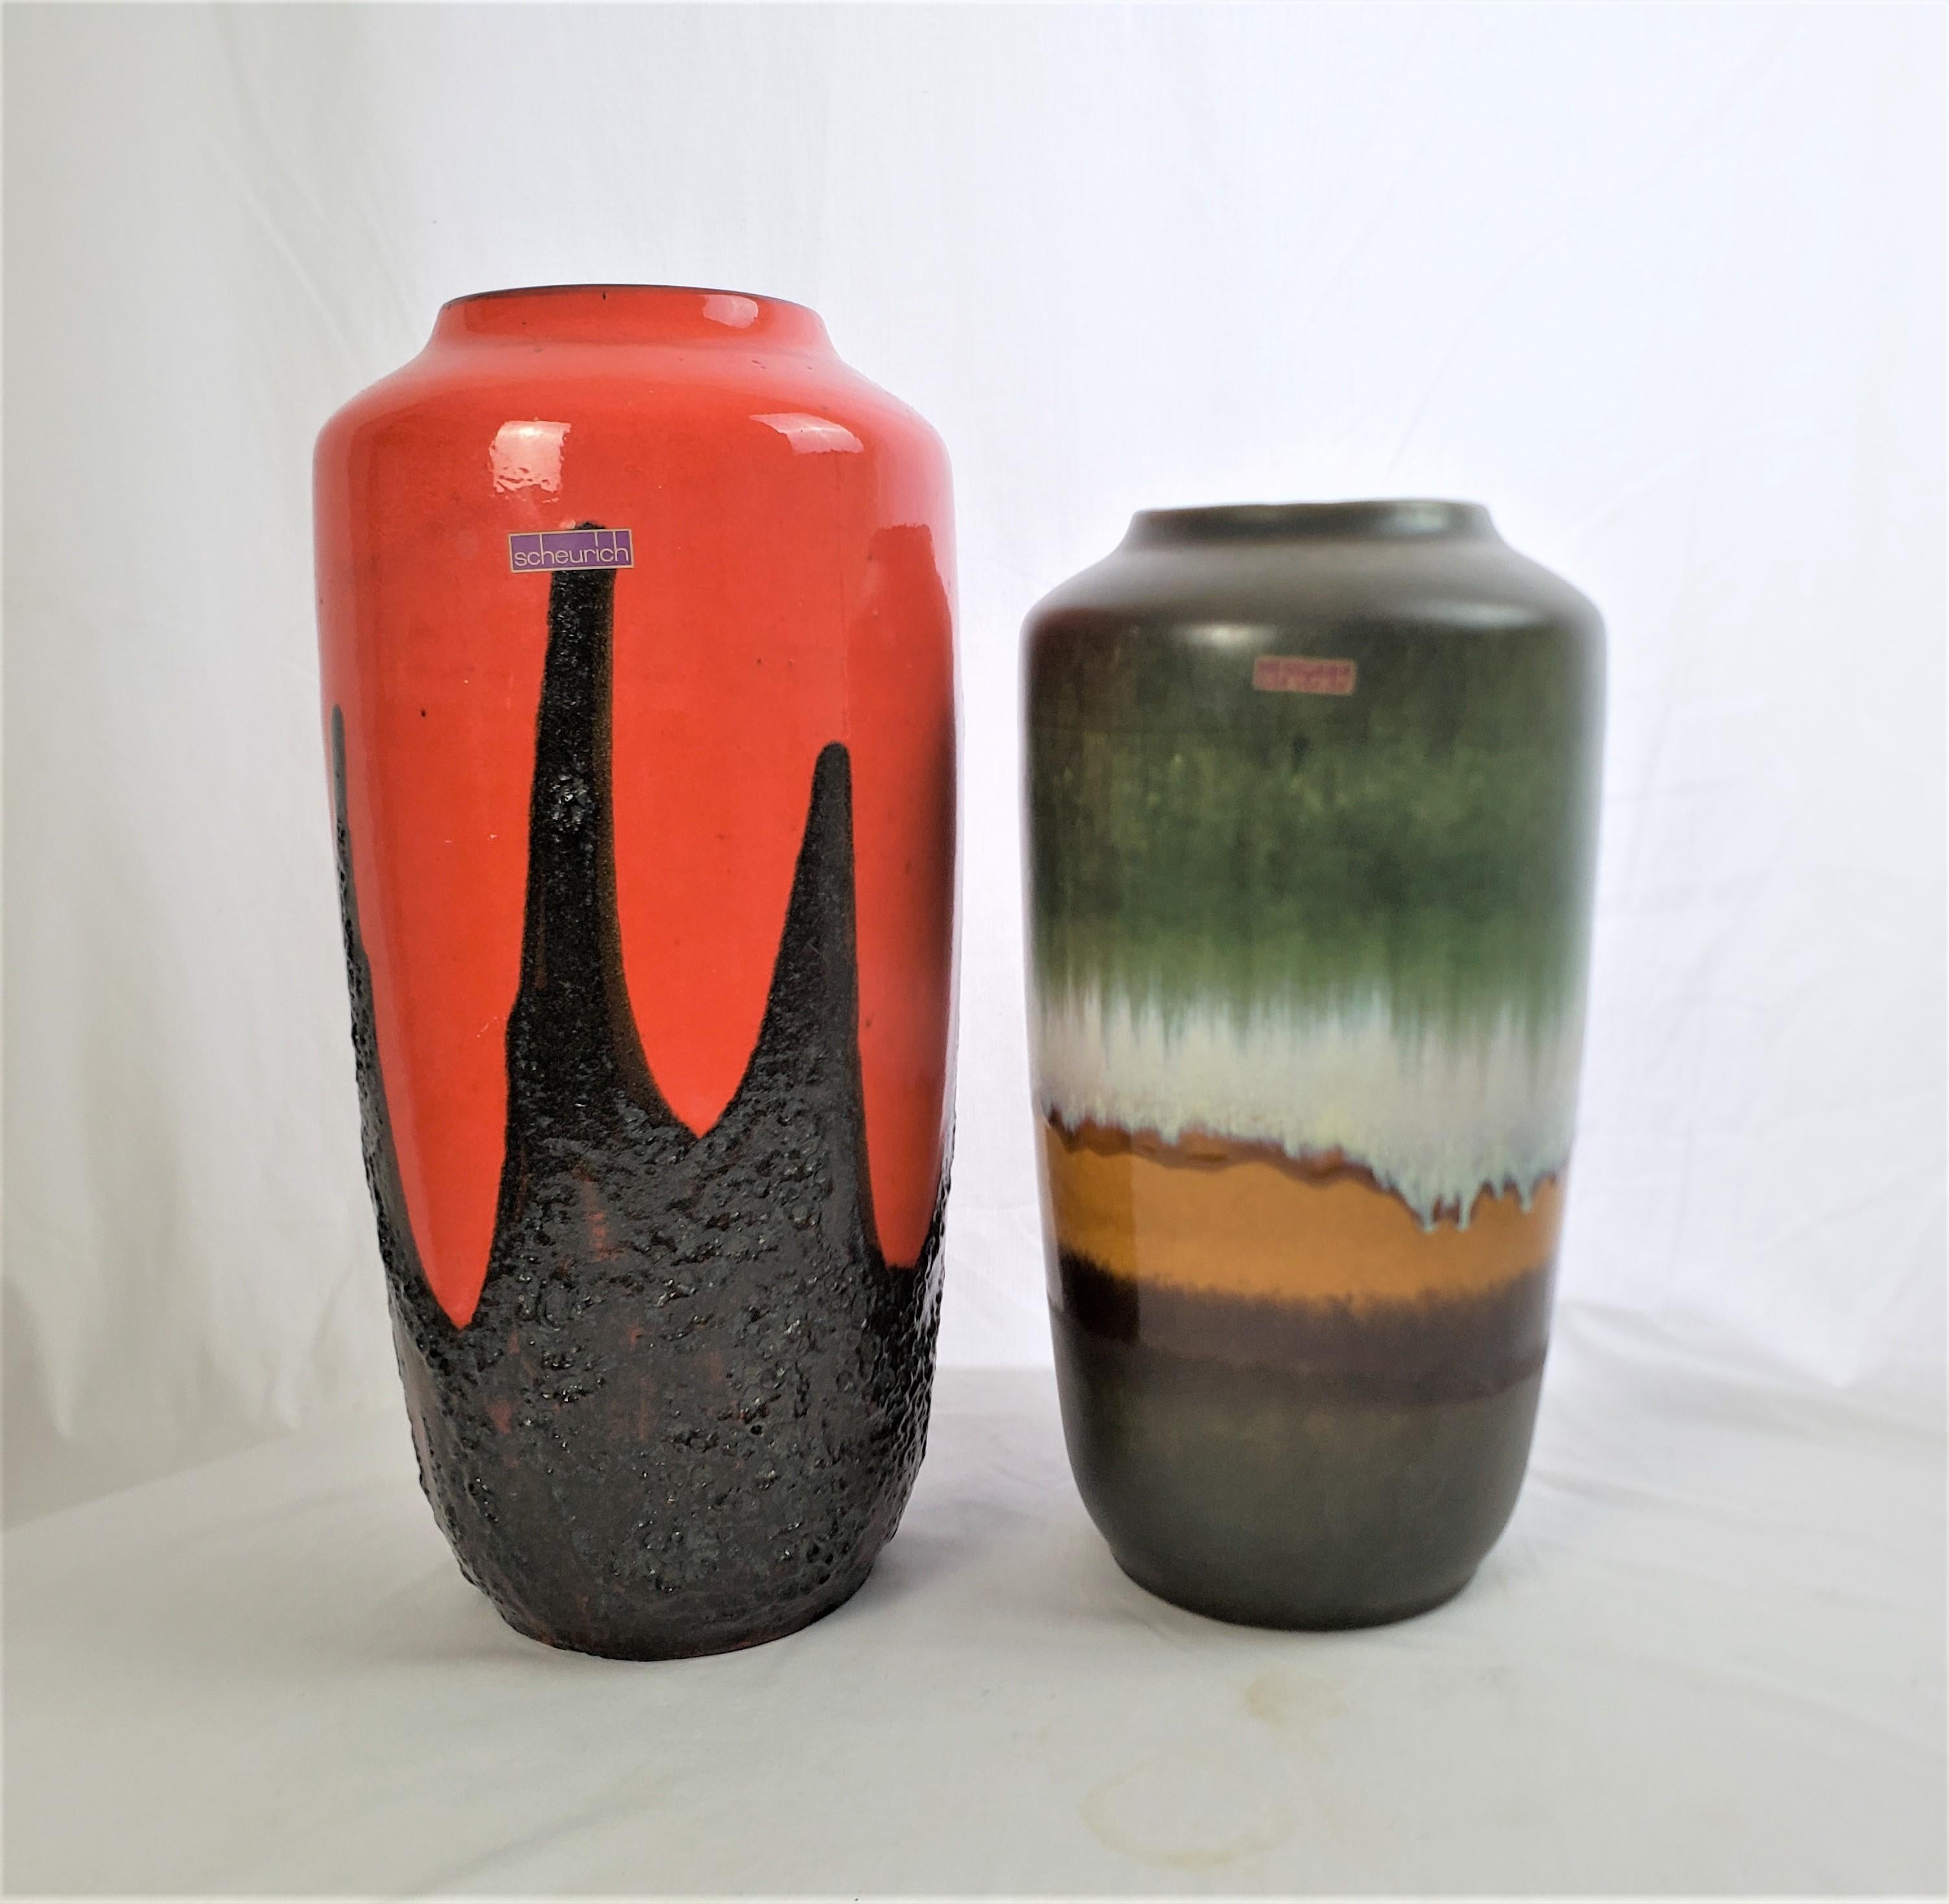 This pair of large vases were made by the Scheurich factory of West Germany in approximately 1965, and done in their signature Mid Century Modern style. The vases are composed of molded ceramic, with a hand-painted glaze. The larger vase is done in